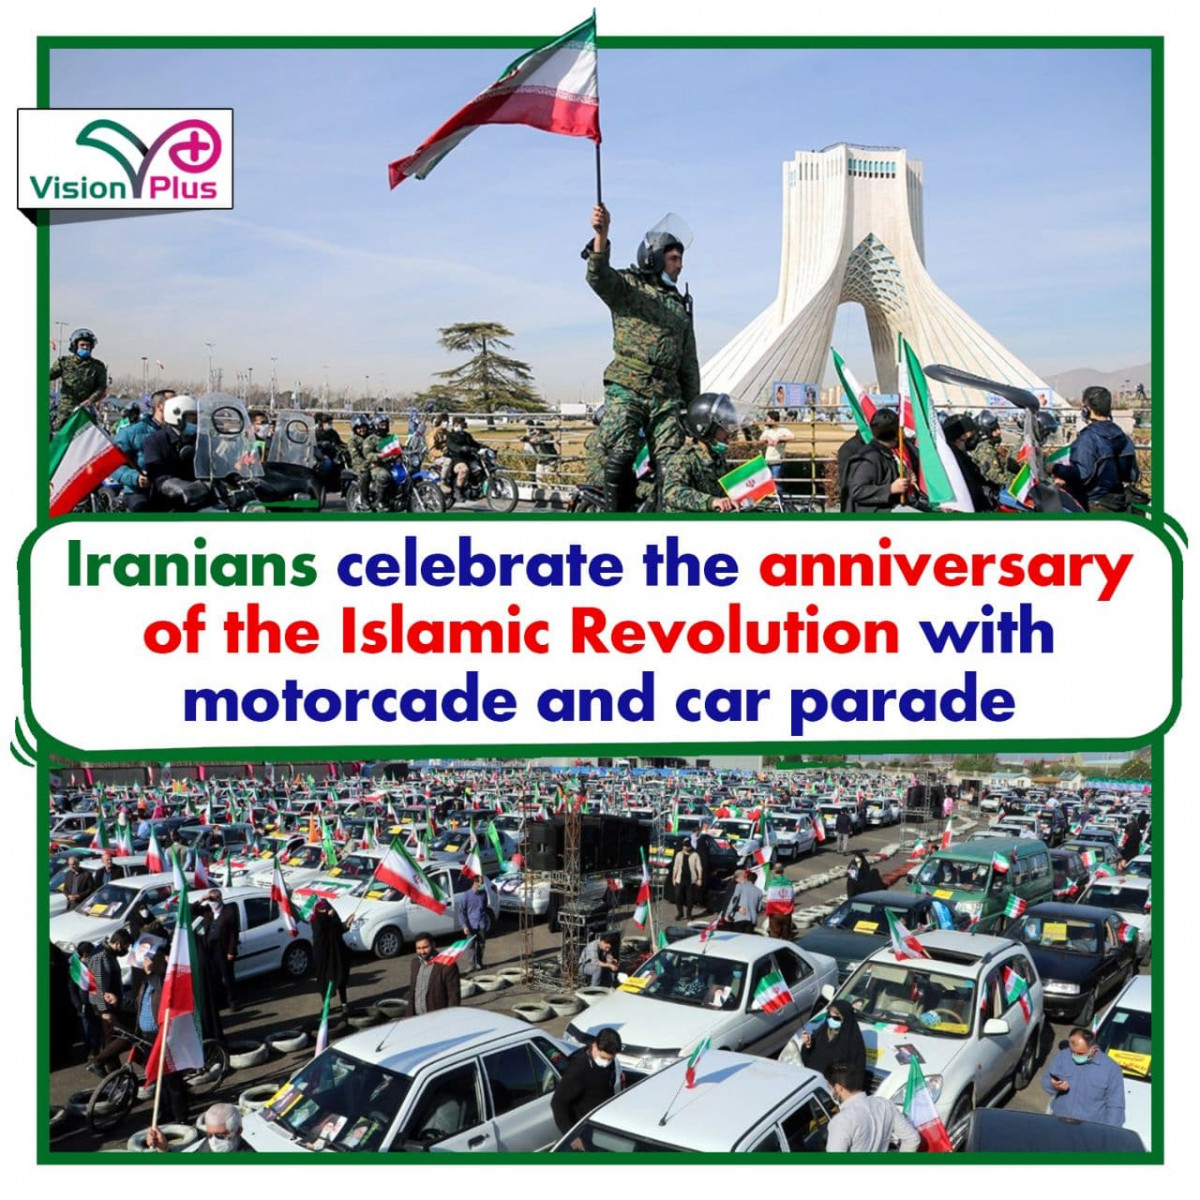 Iranians celebrate the anniversary of the Islamic Revolution with motorcade and car parade